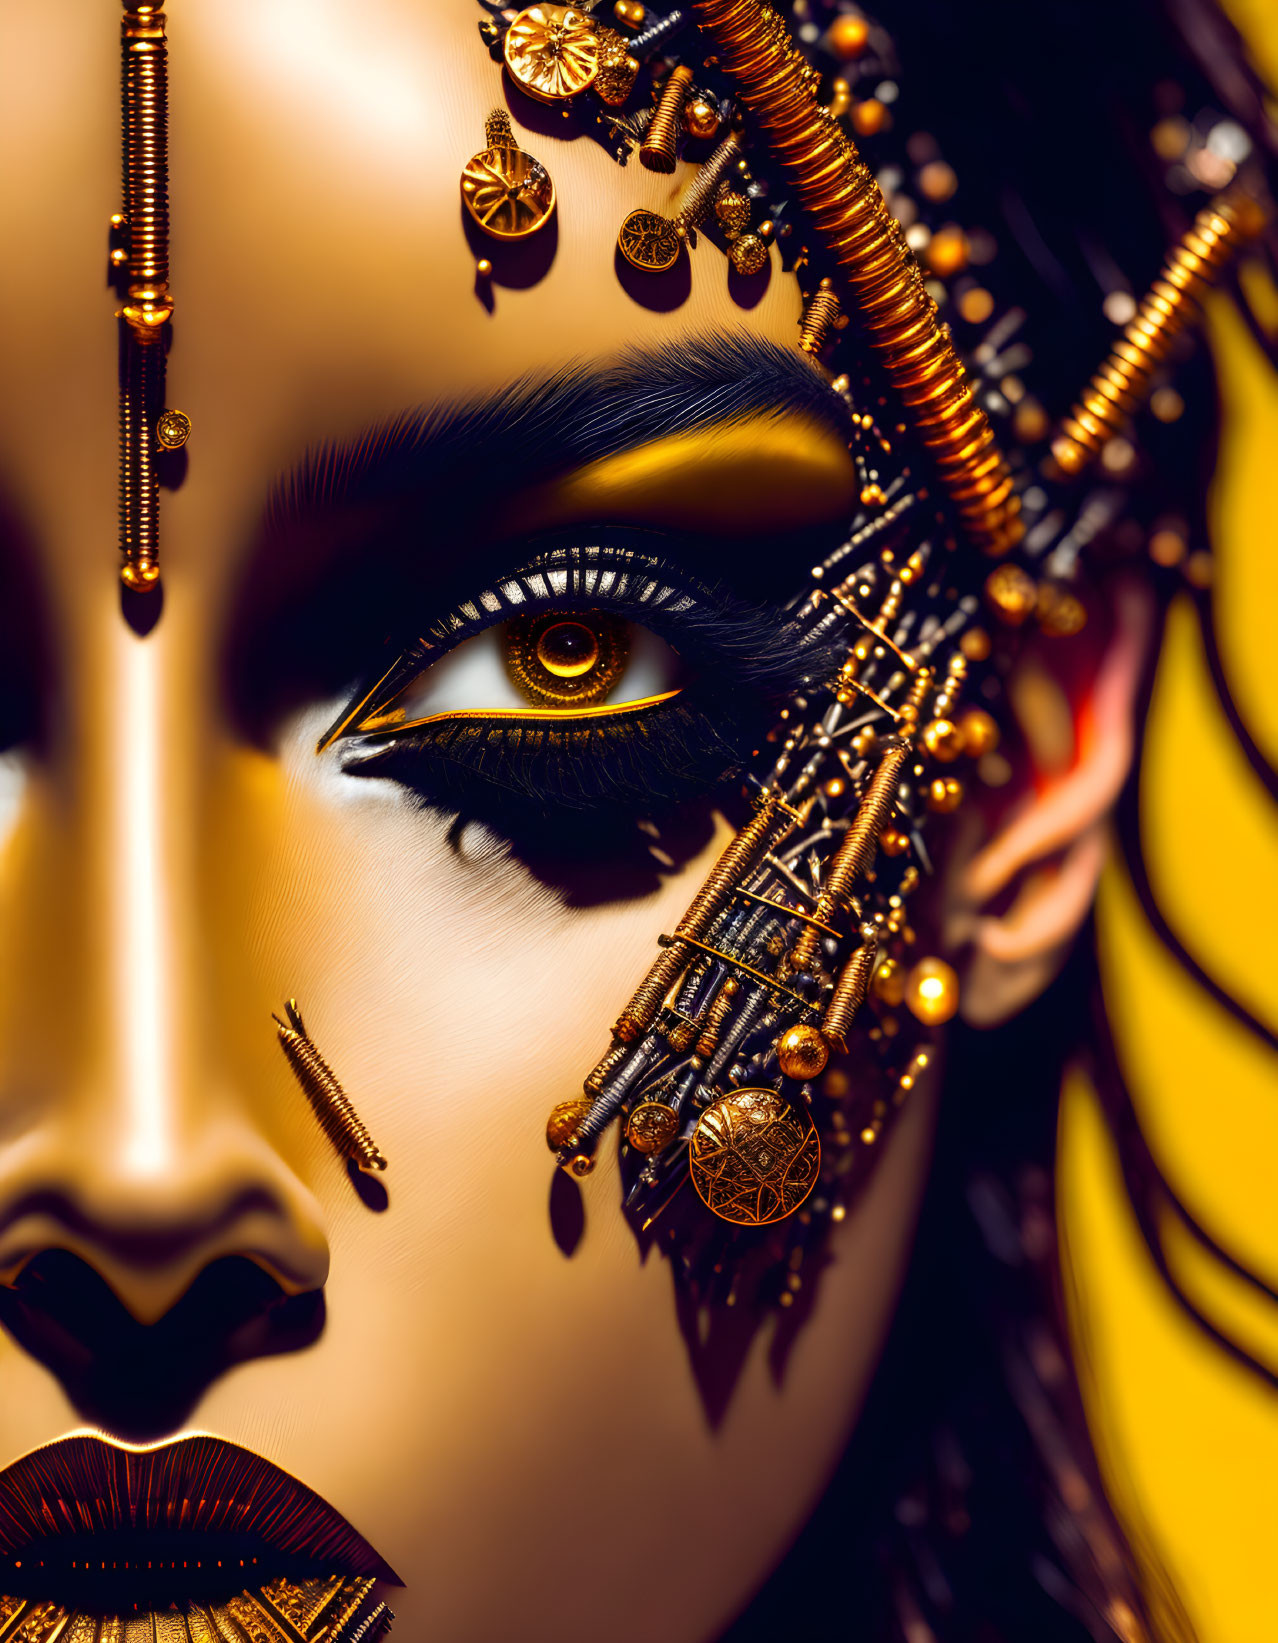 Person with ornate gold facial jewelry and dramatic eye makeup.